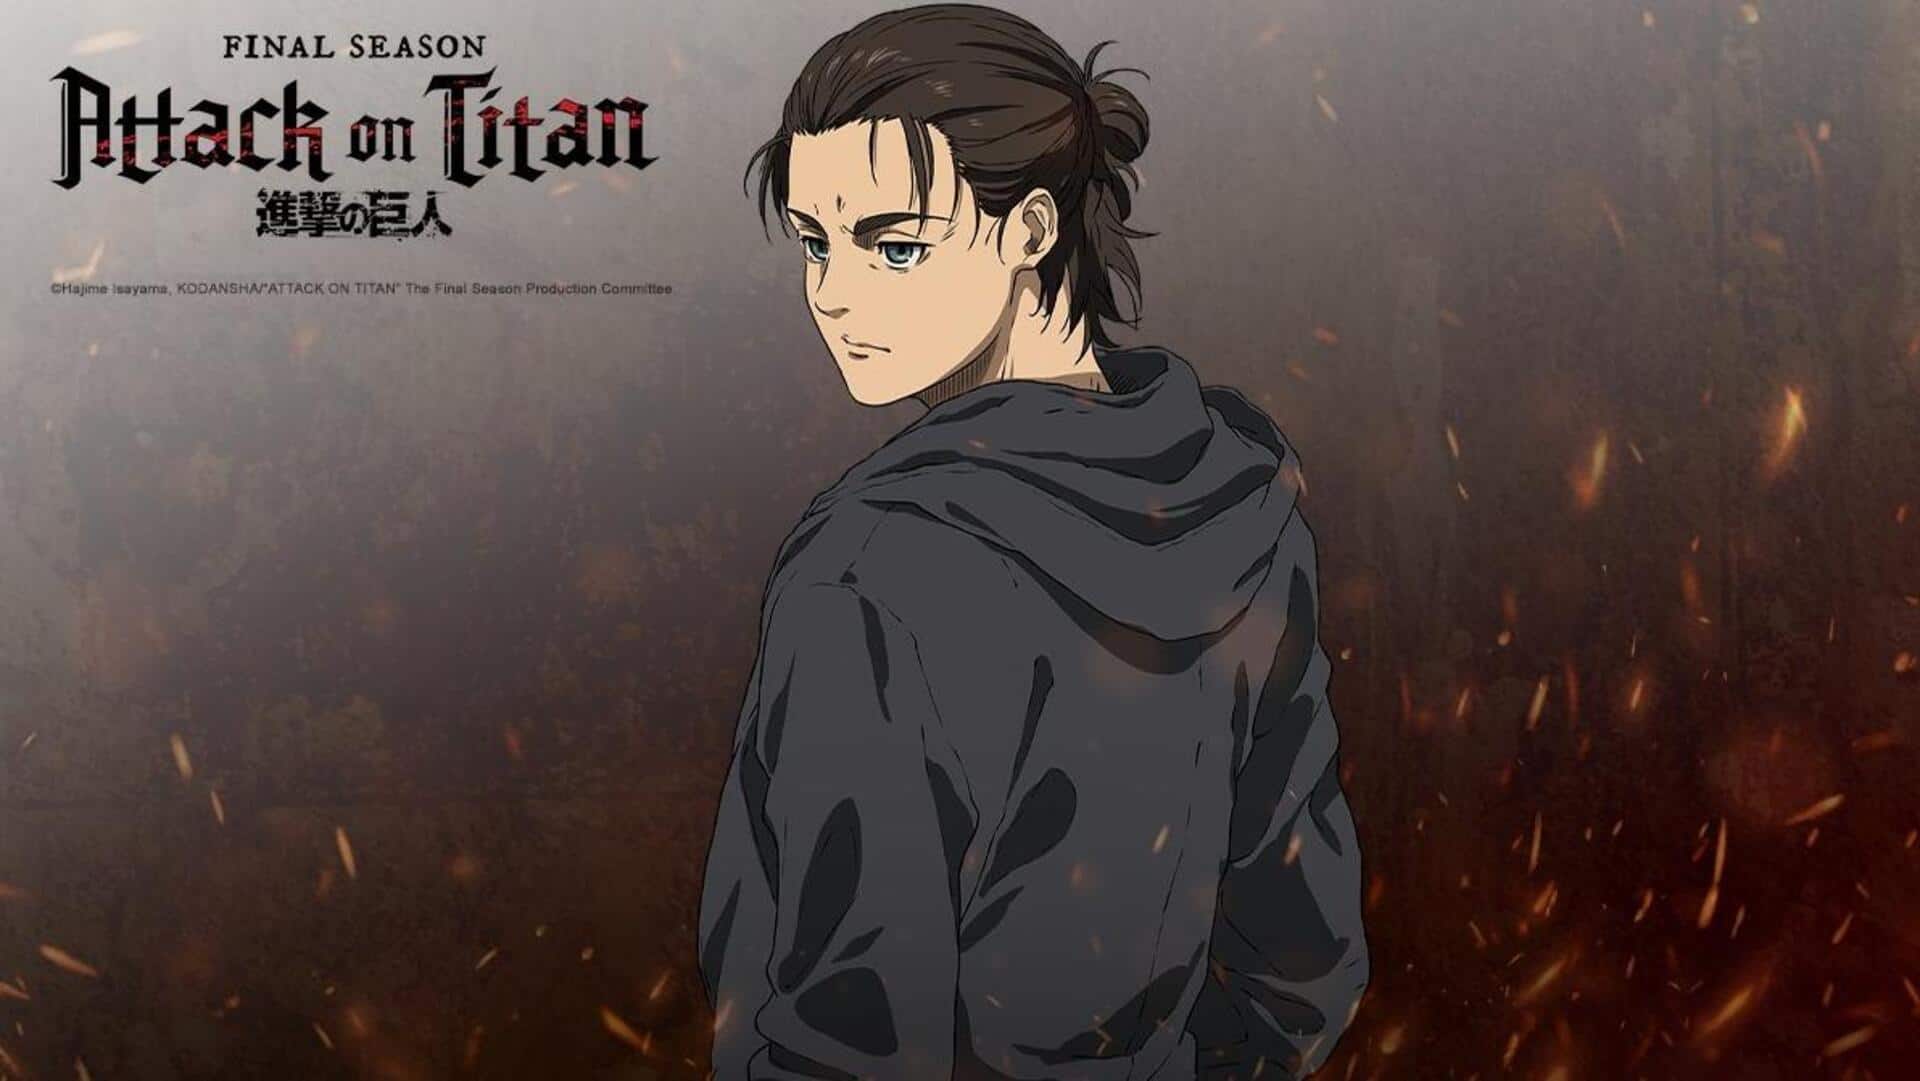 'Attack on Titan': Everything you need to know